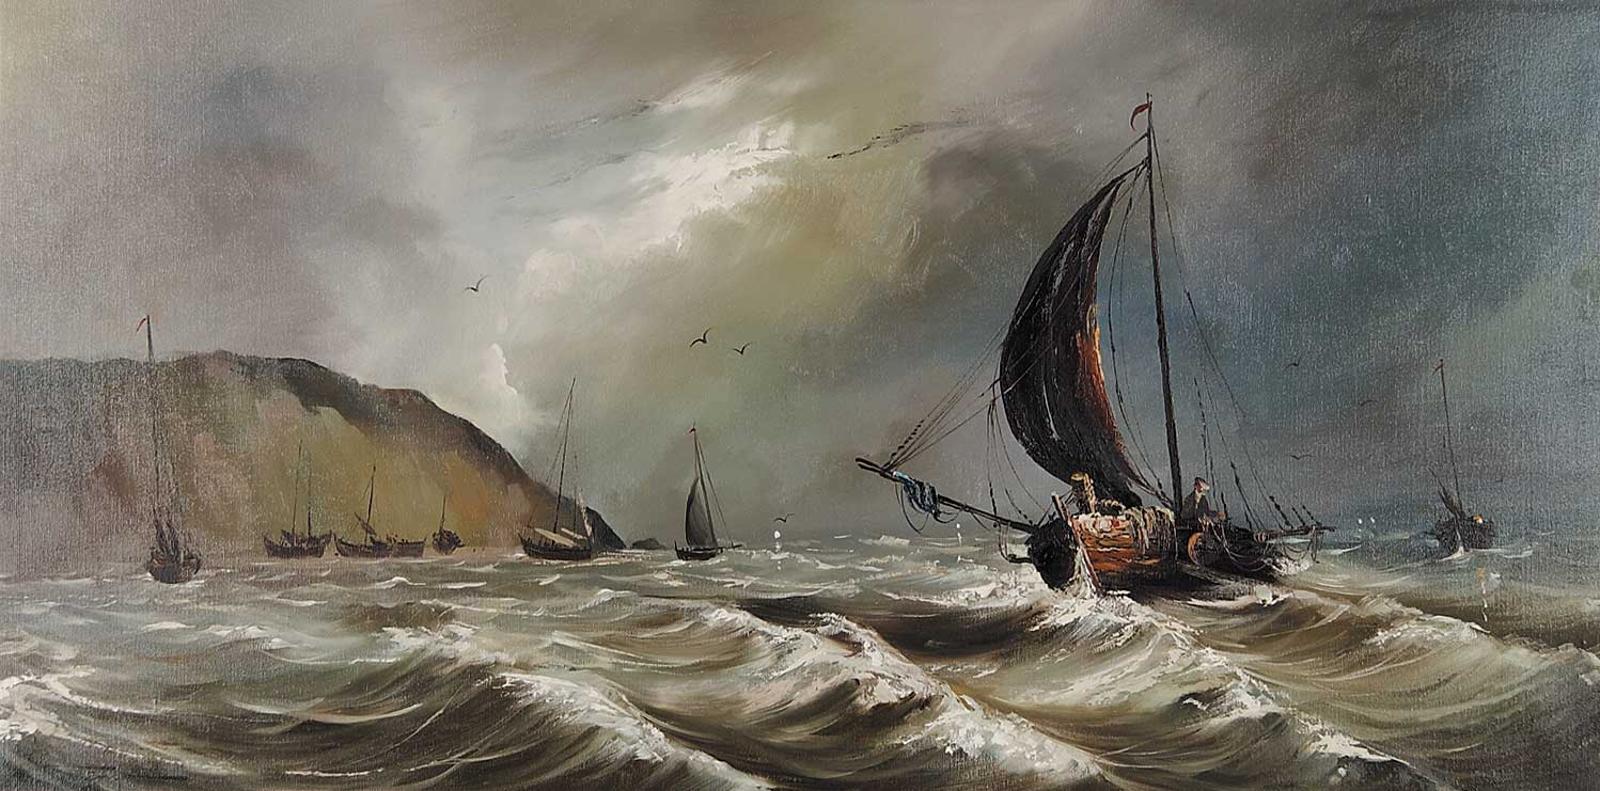 Tin Yan Chan (1942) - Untitled - Sailing During the Storm